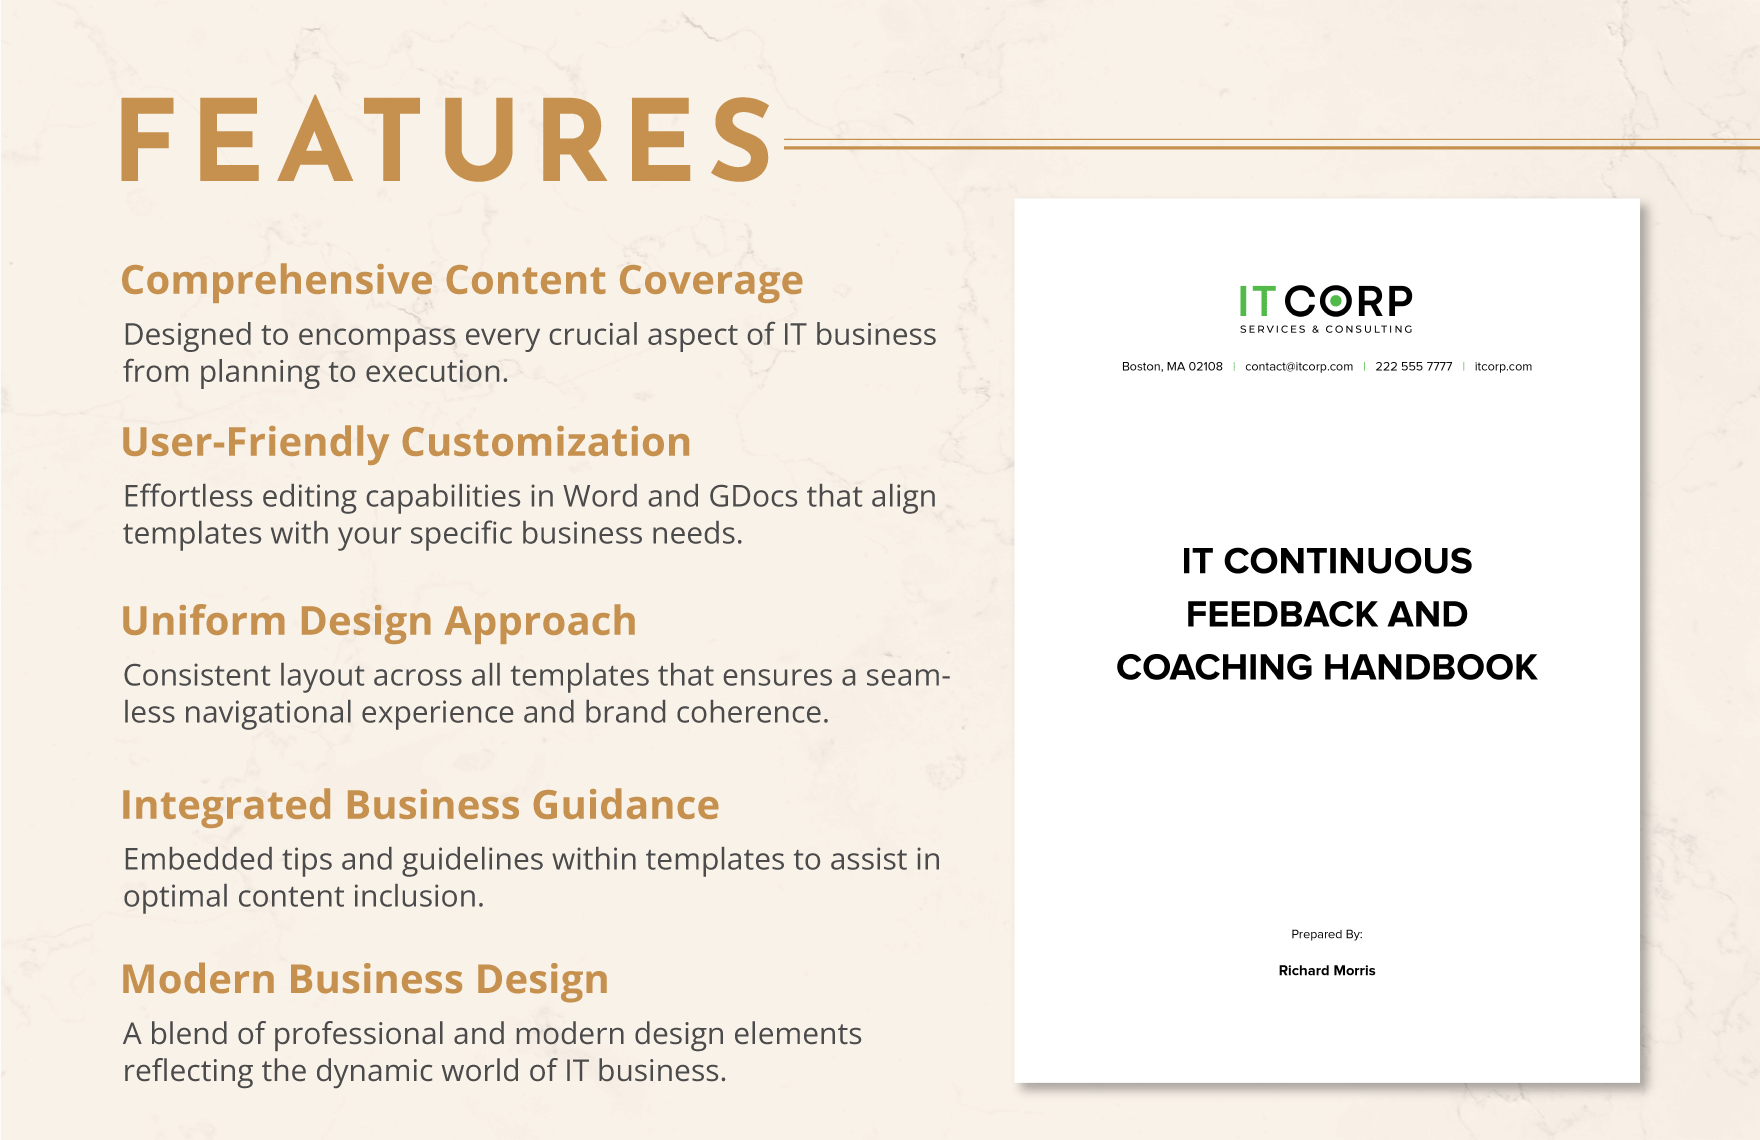 IT Continuous Feedback and Coaching Handbook Template